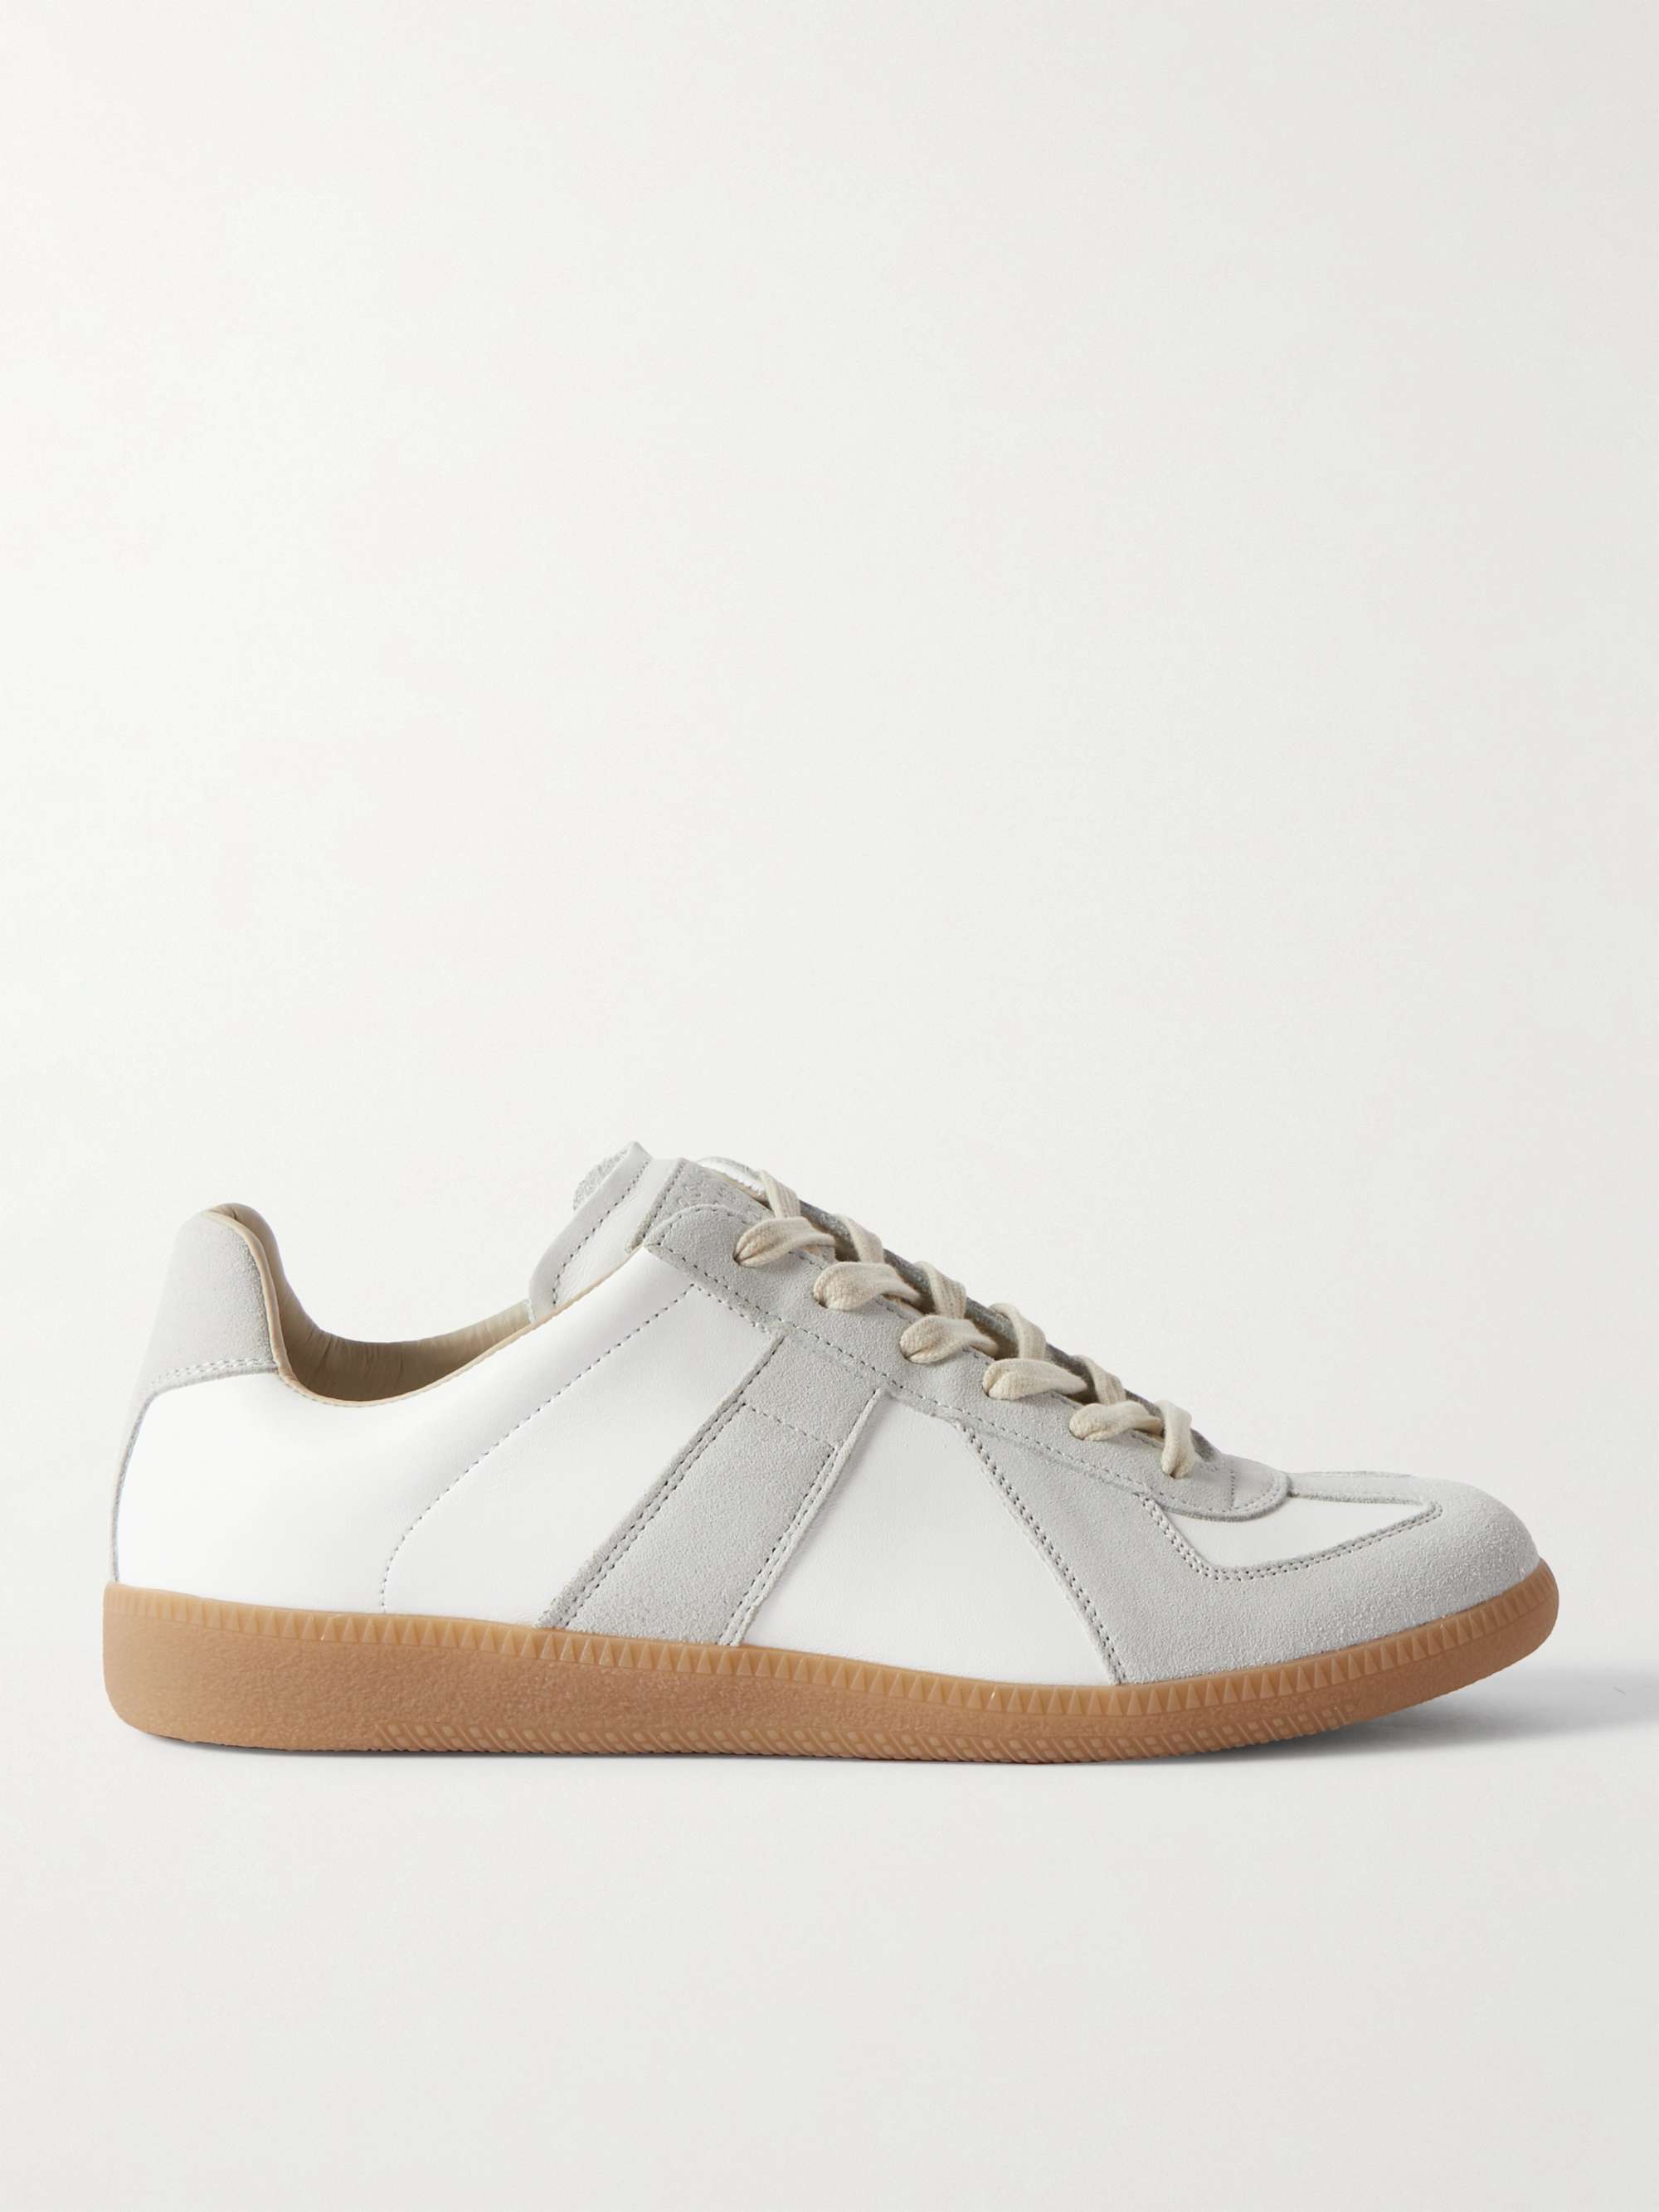 Replica Leather and Suede Sneakers